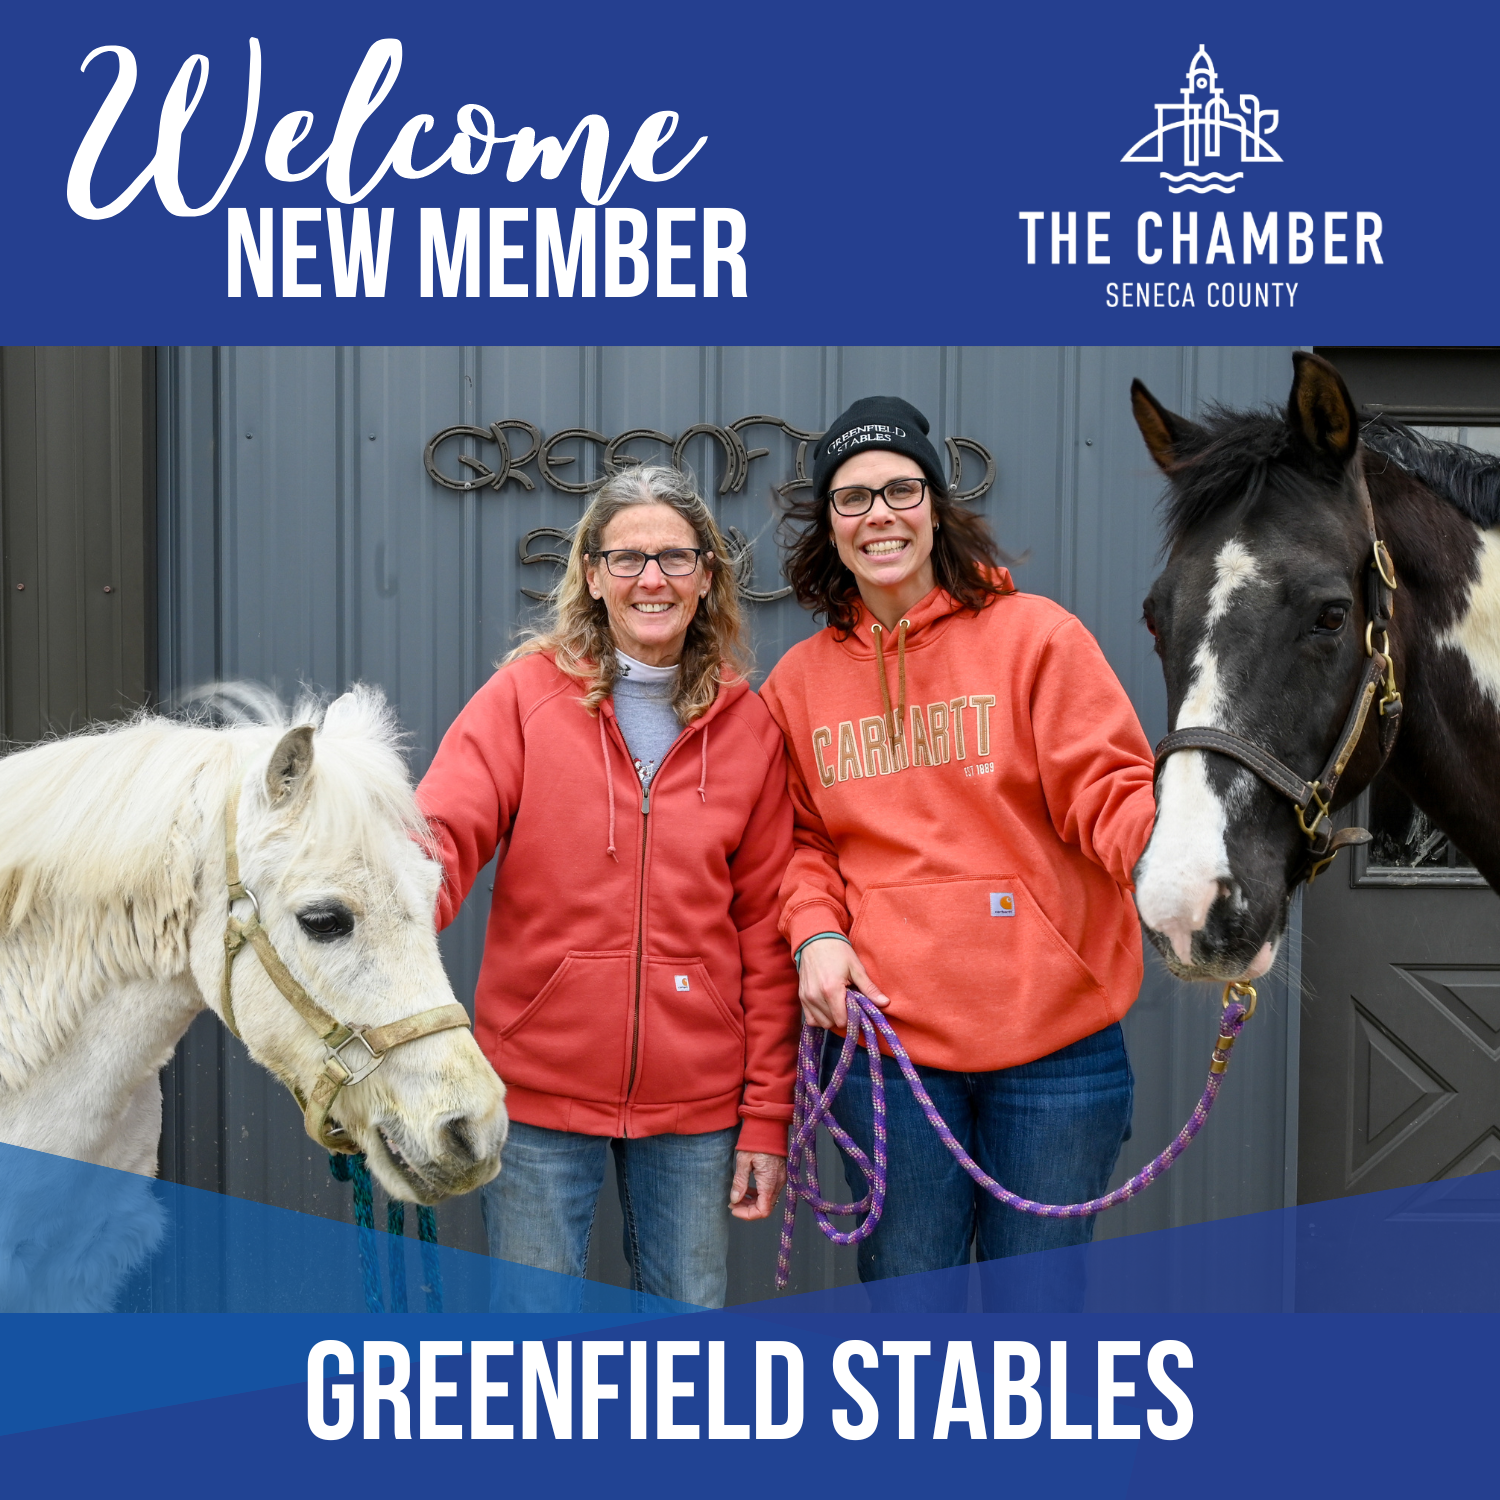 New Member: Greenfield Stables